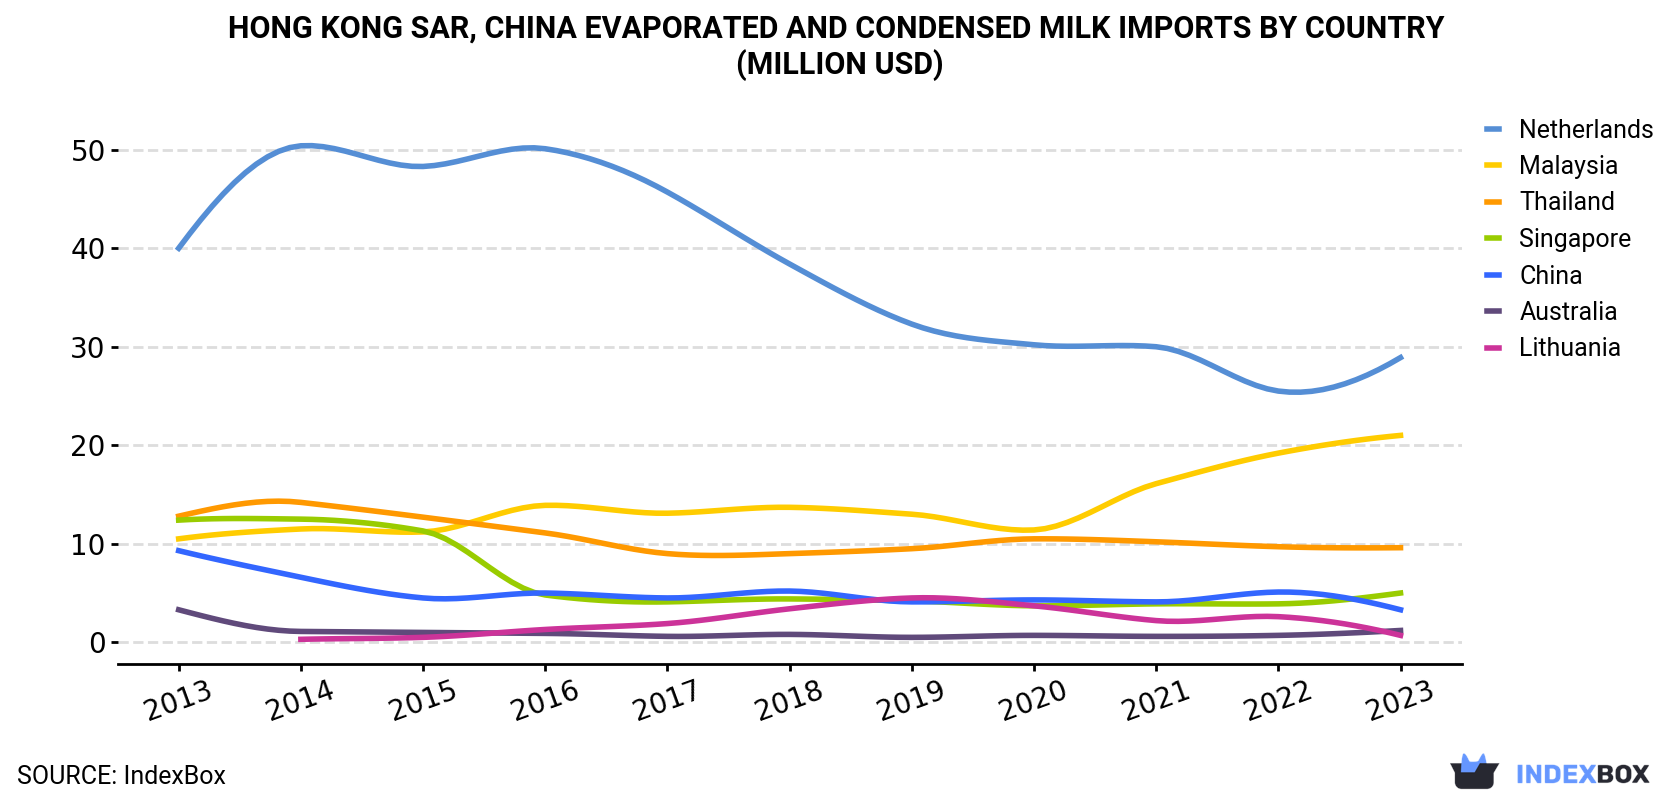 Hong Kong Evaporated And Condensed Milk Imports By Country (Million USD)